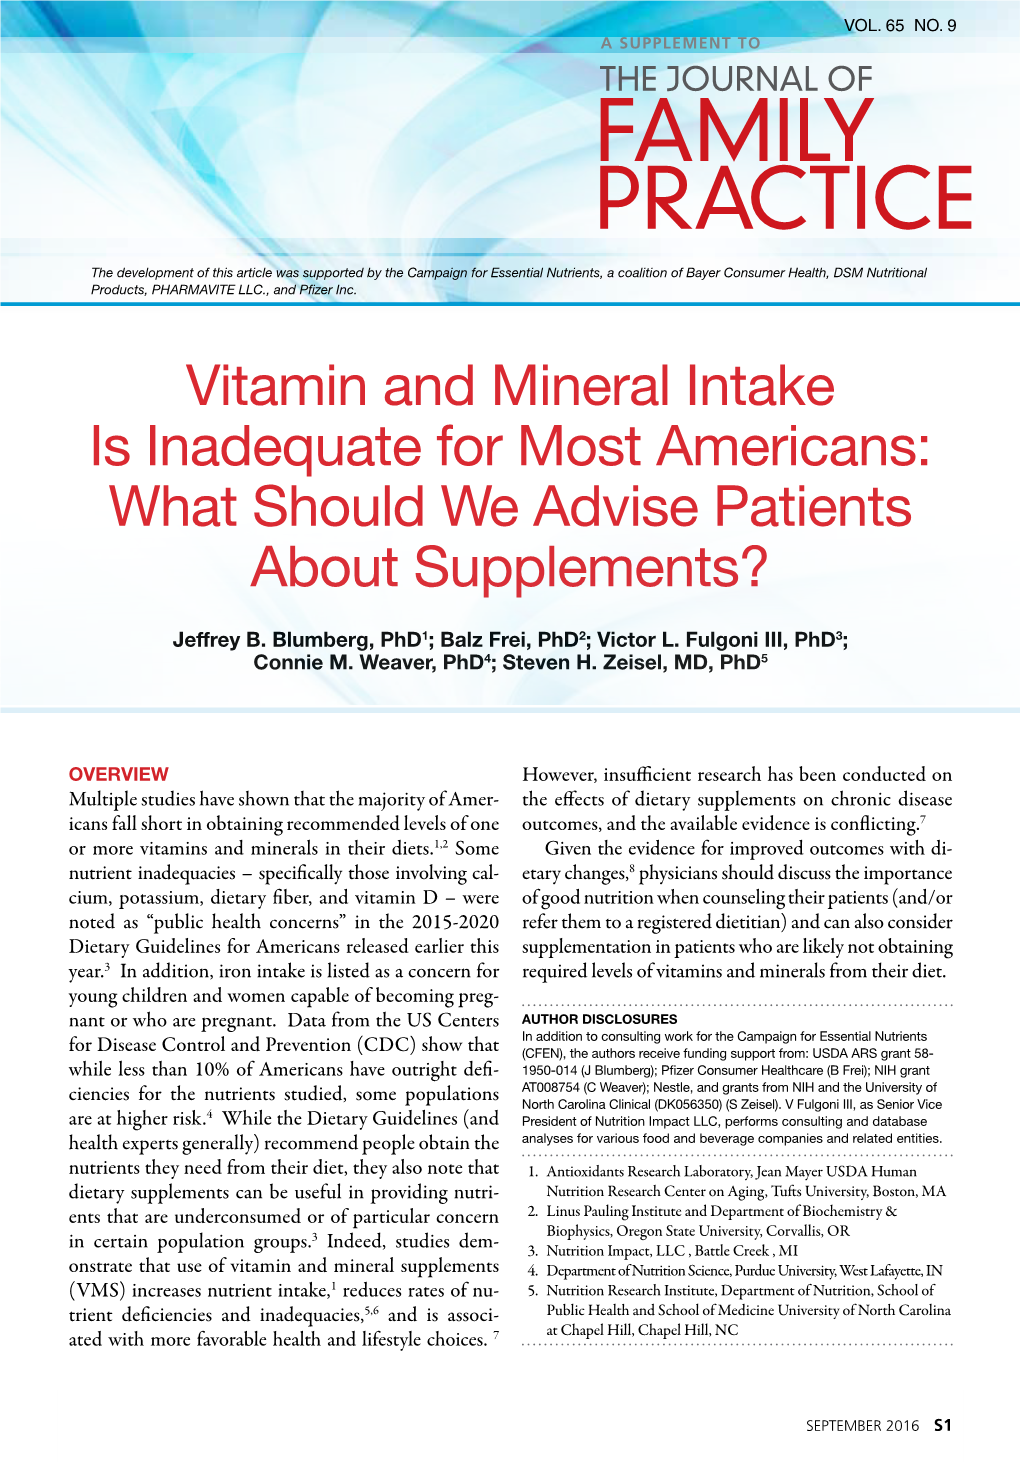 Vitamin and Mineral Intake Is Inadequate for Most Americans: What Should We Advise Patients About Supplements?